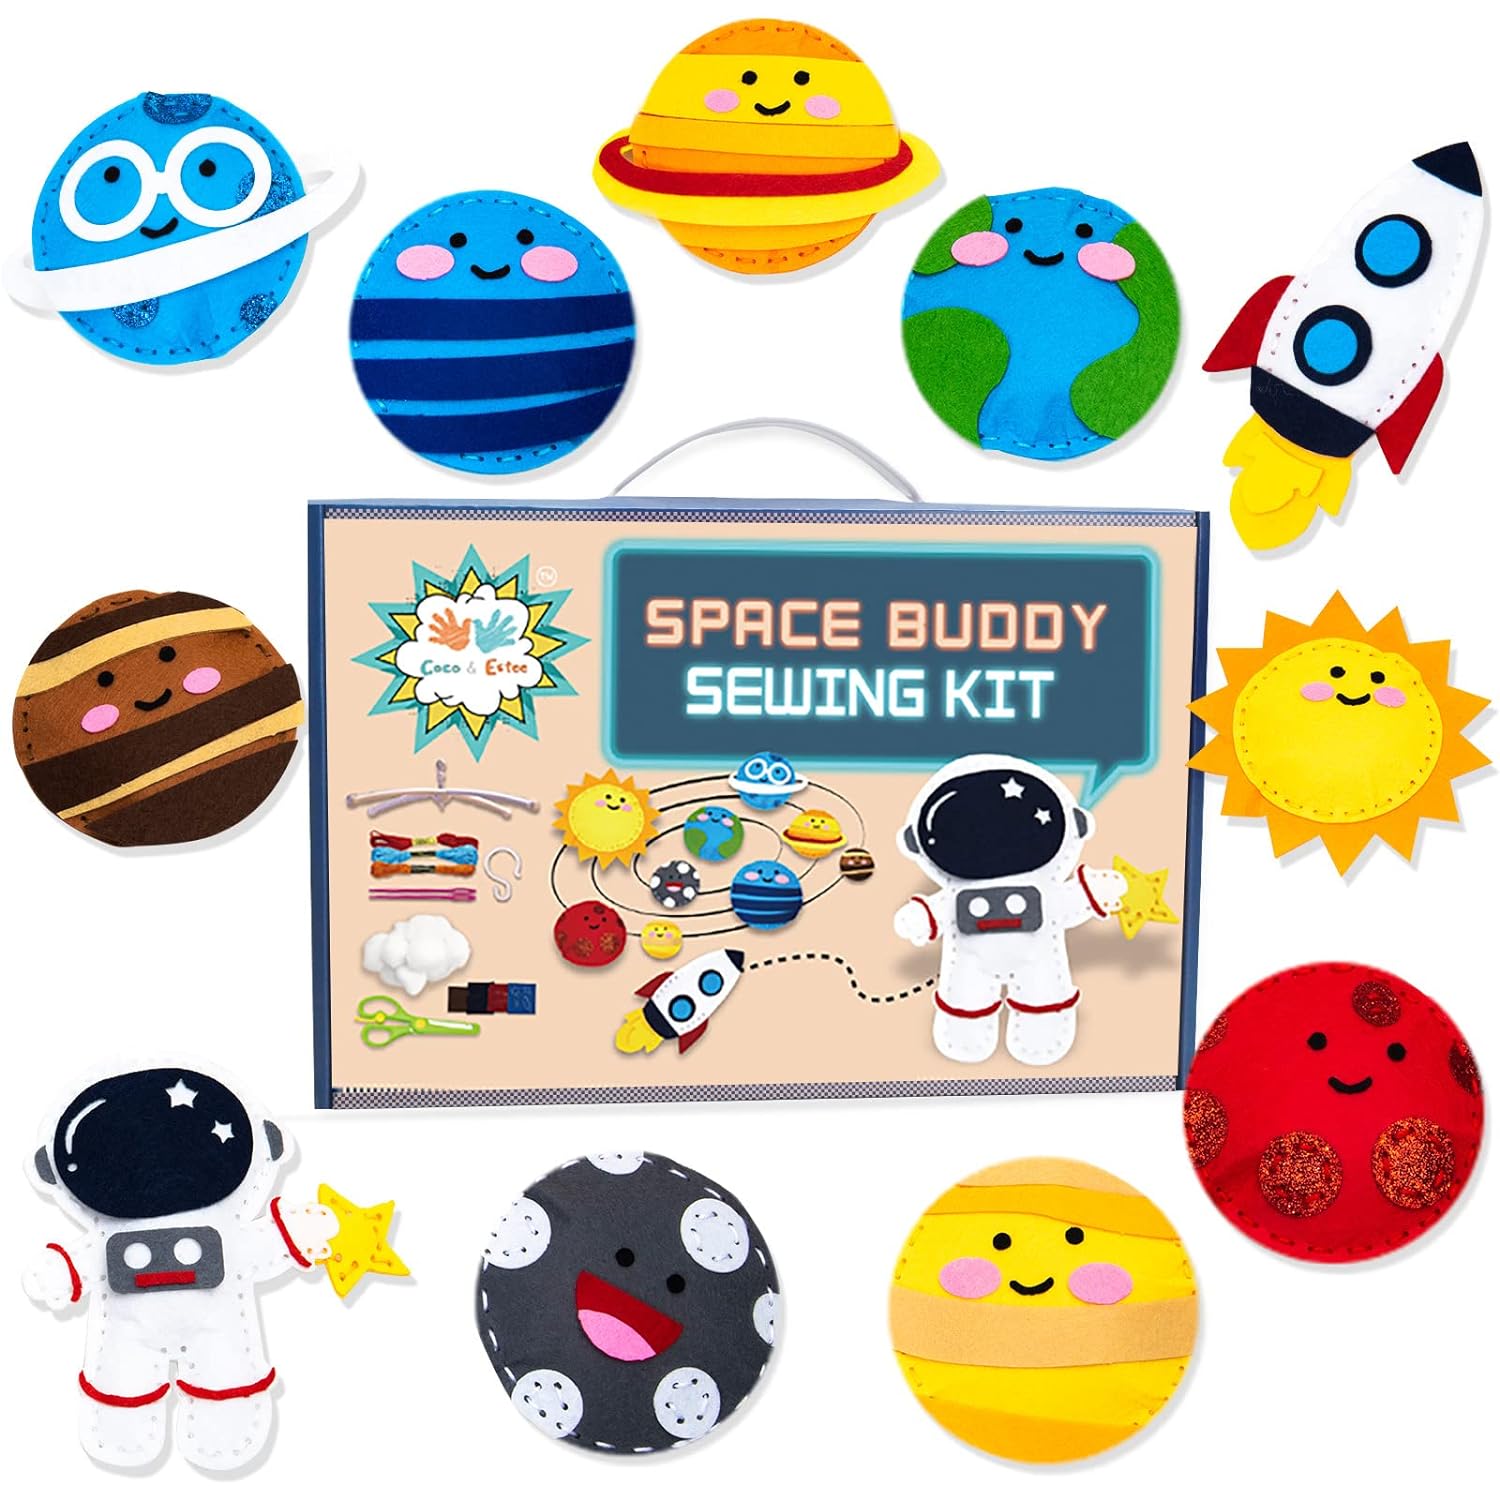 Great Choice Products Coco&Estee Solar System Sewing Kit For Kids, Make  Your Own Stuffed Animal Kit, Kids Sewing Kit For Beginners, Embroidery K